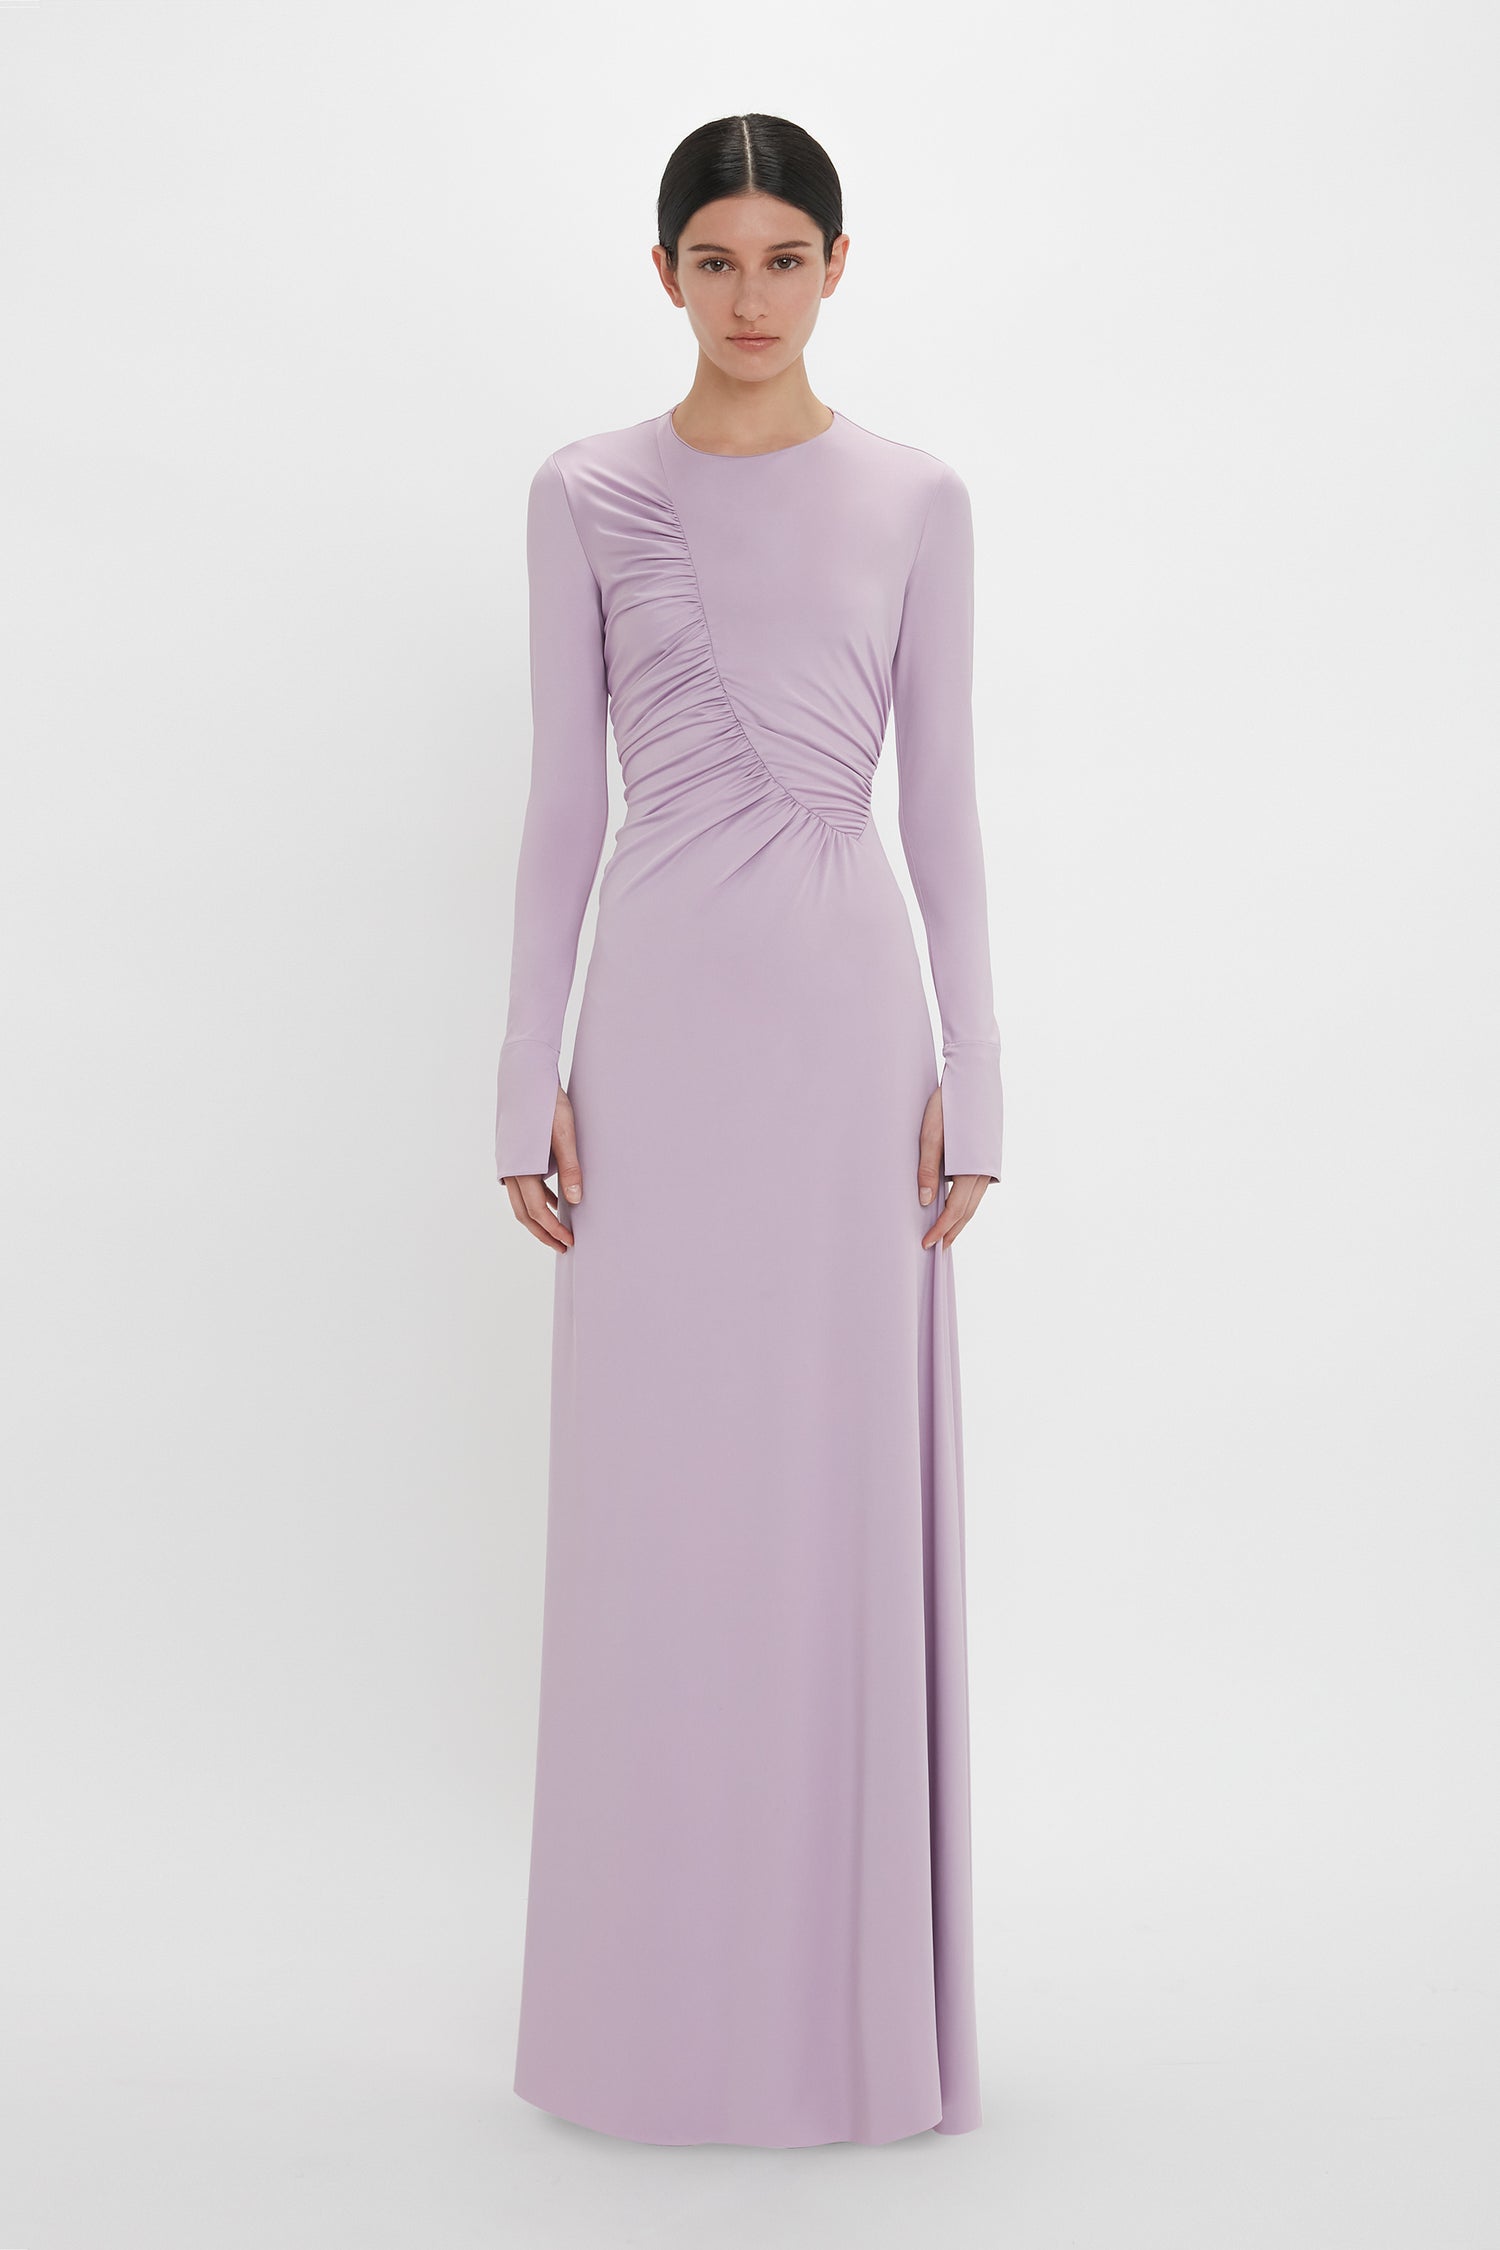 A person stands against a plain background wearing a long-sleeved, floor-length Victoria Beckham Ruched Detail Floor-Length Gown In Petunia, showcasing understated glamour with gathered detailing on one side.